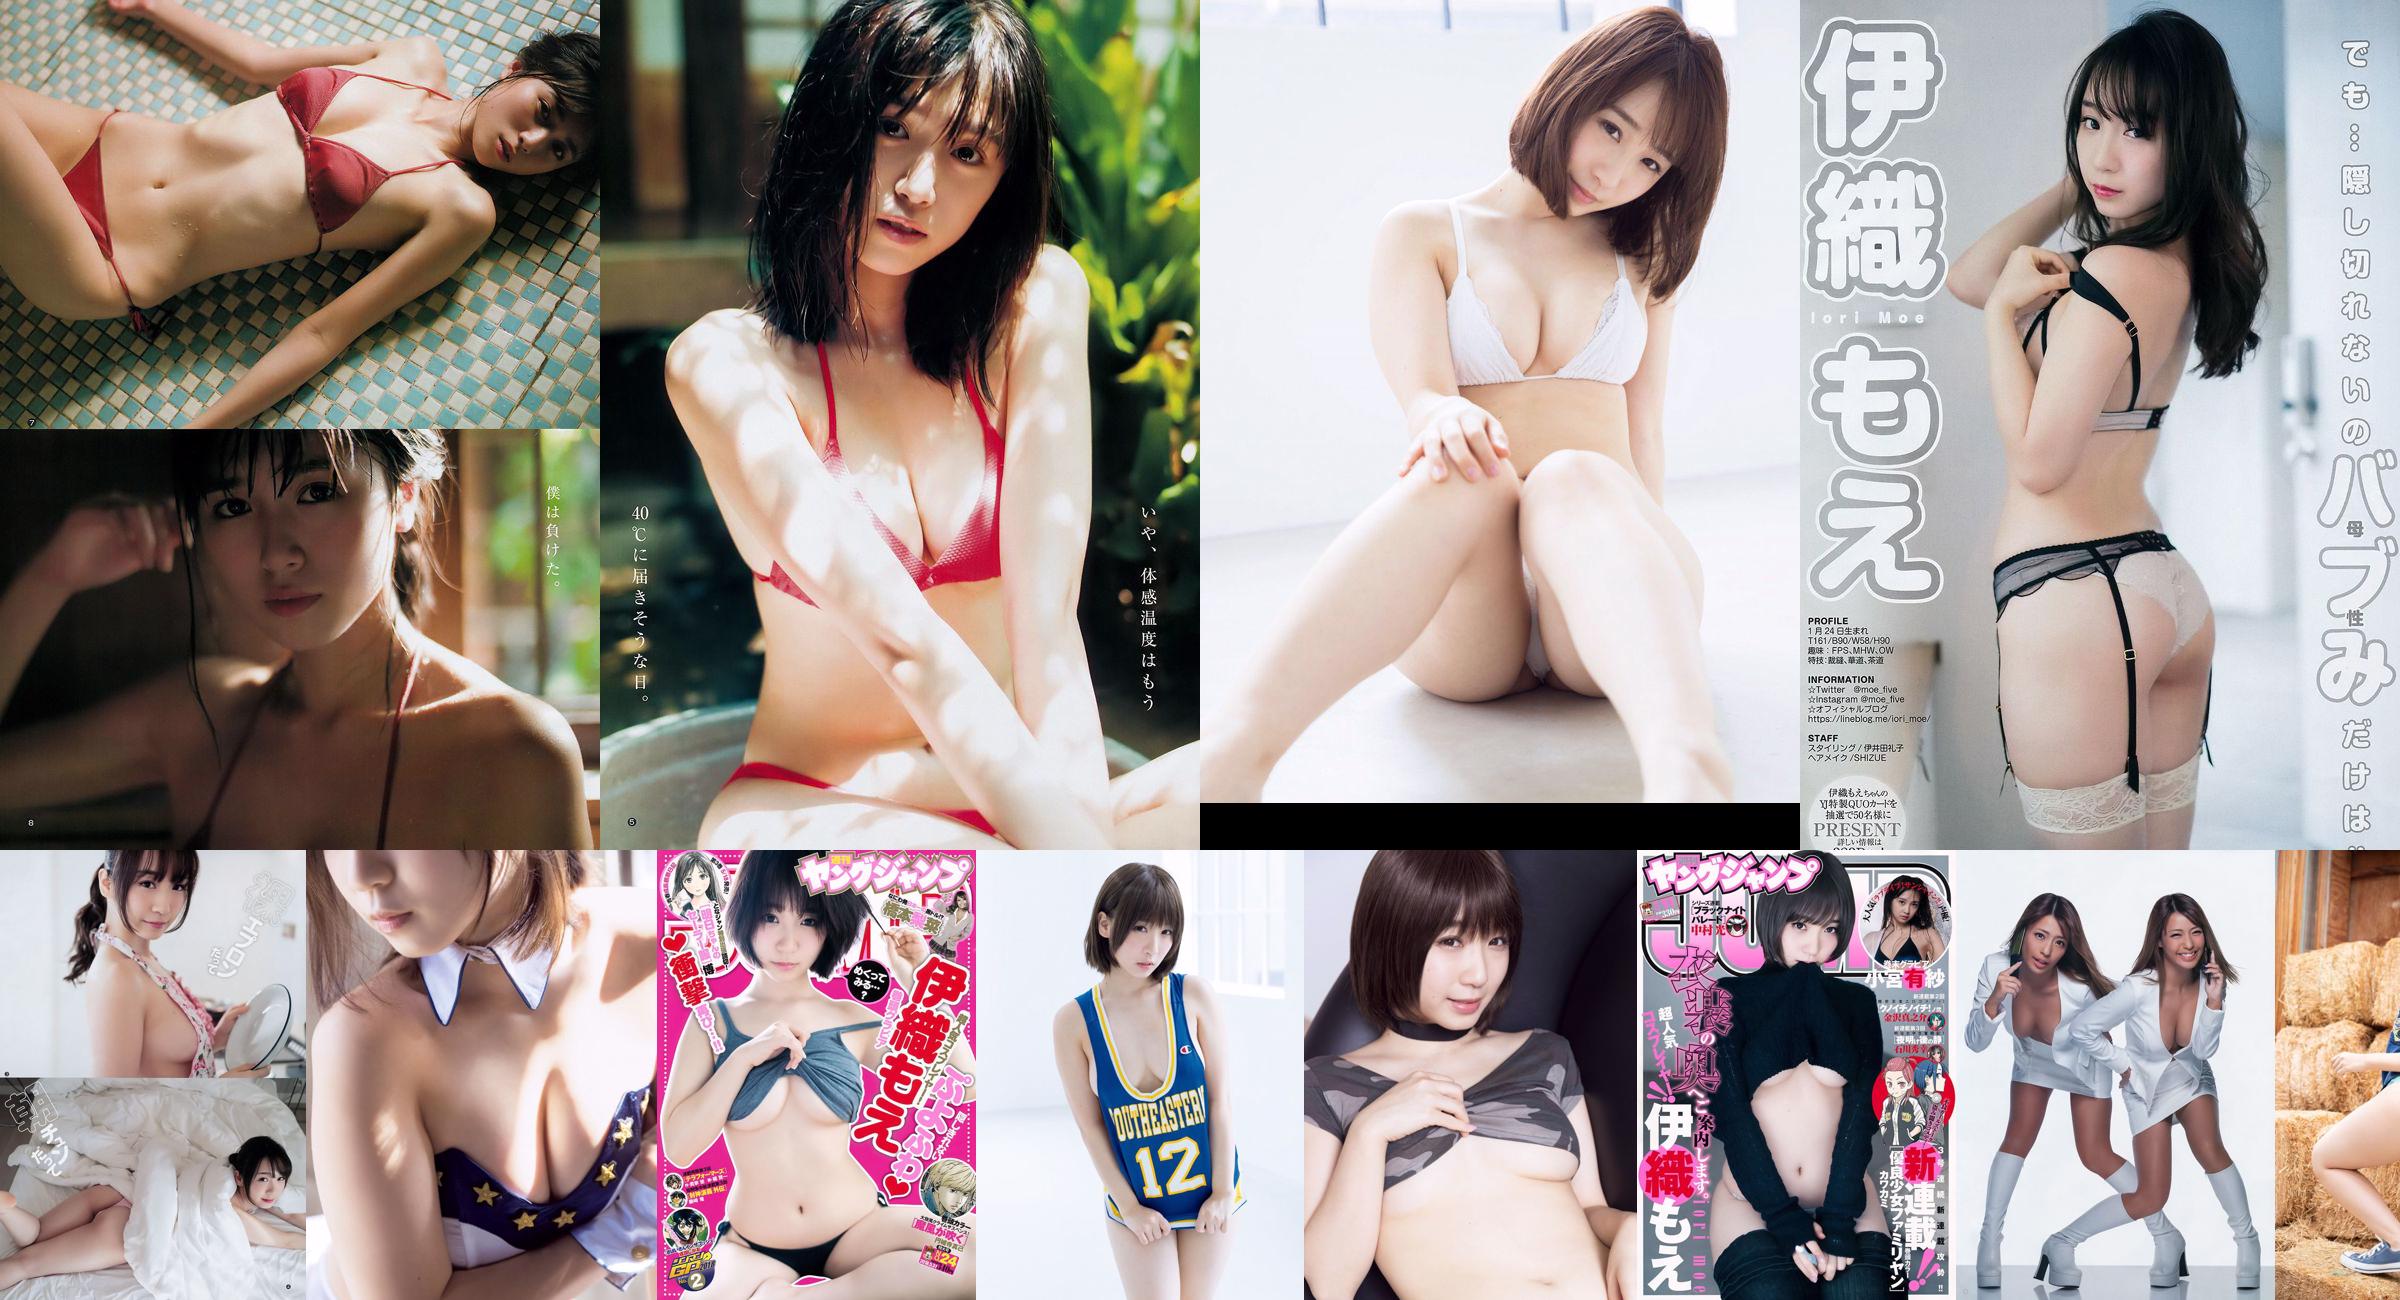 [FRIDAY] Kitazu Yui "Superbest beauty ボディ18 years old" This year's highest ビキニ!  No.fa12f2 Page 1